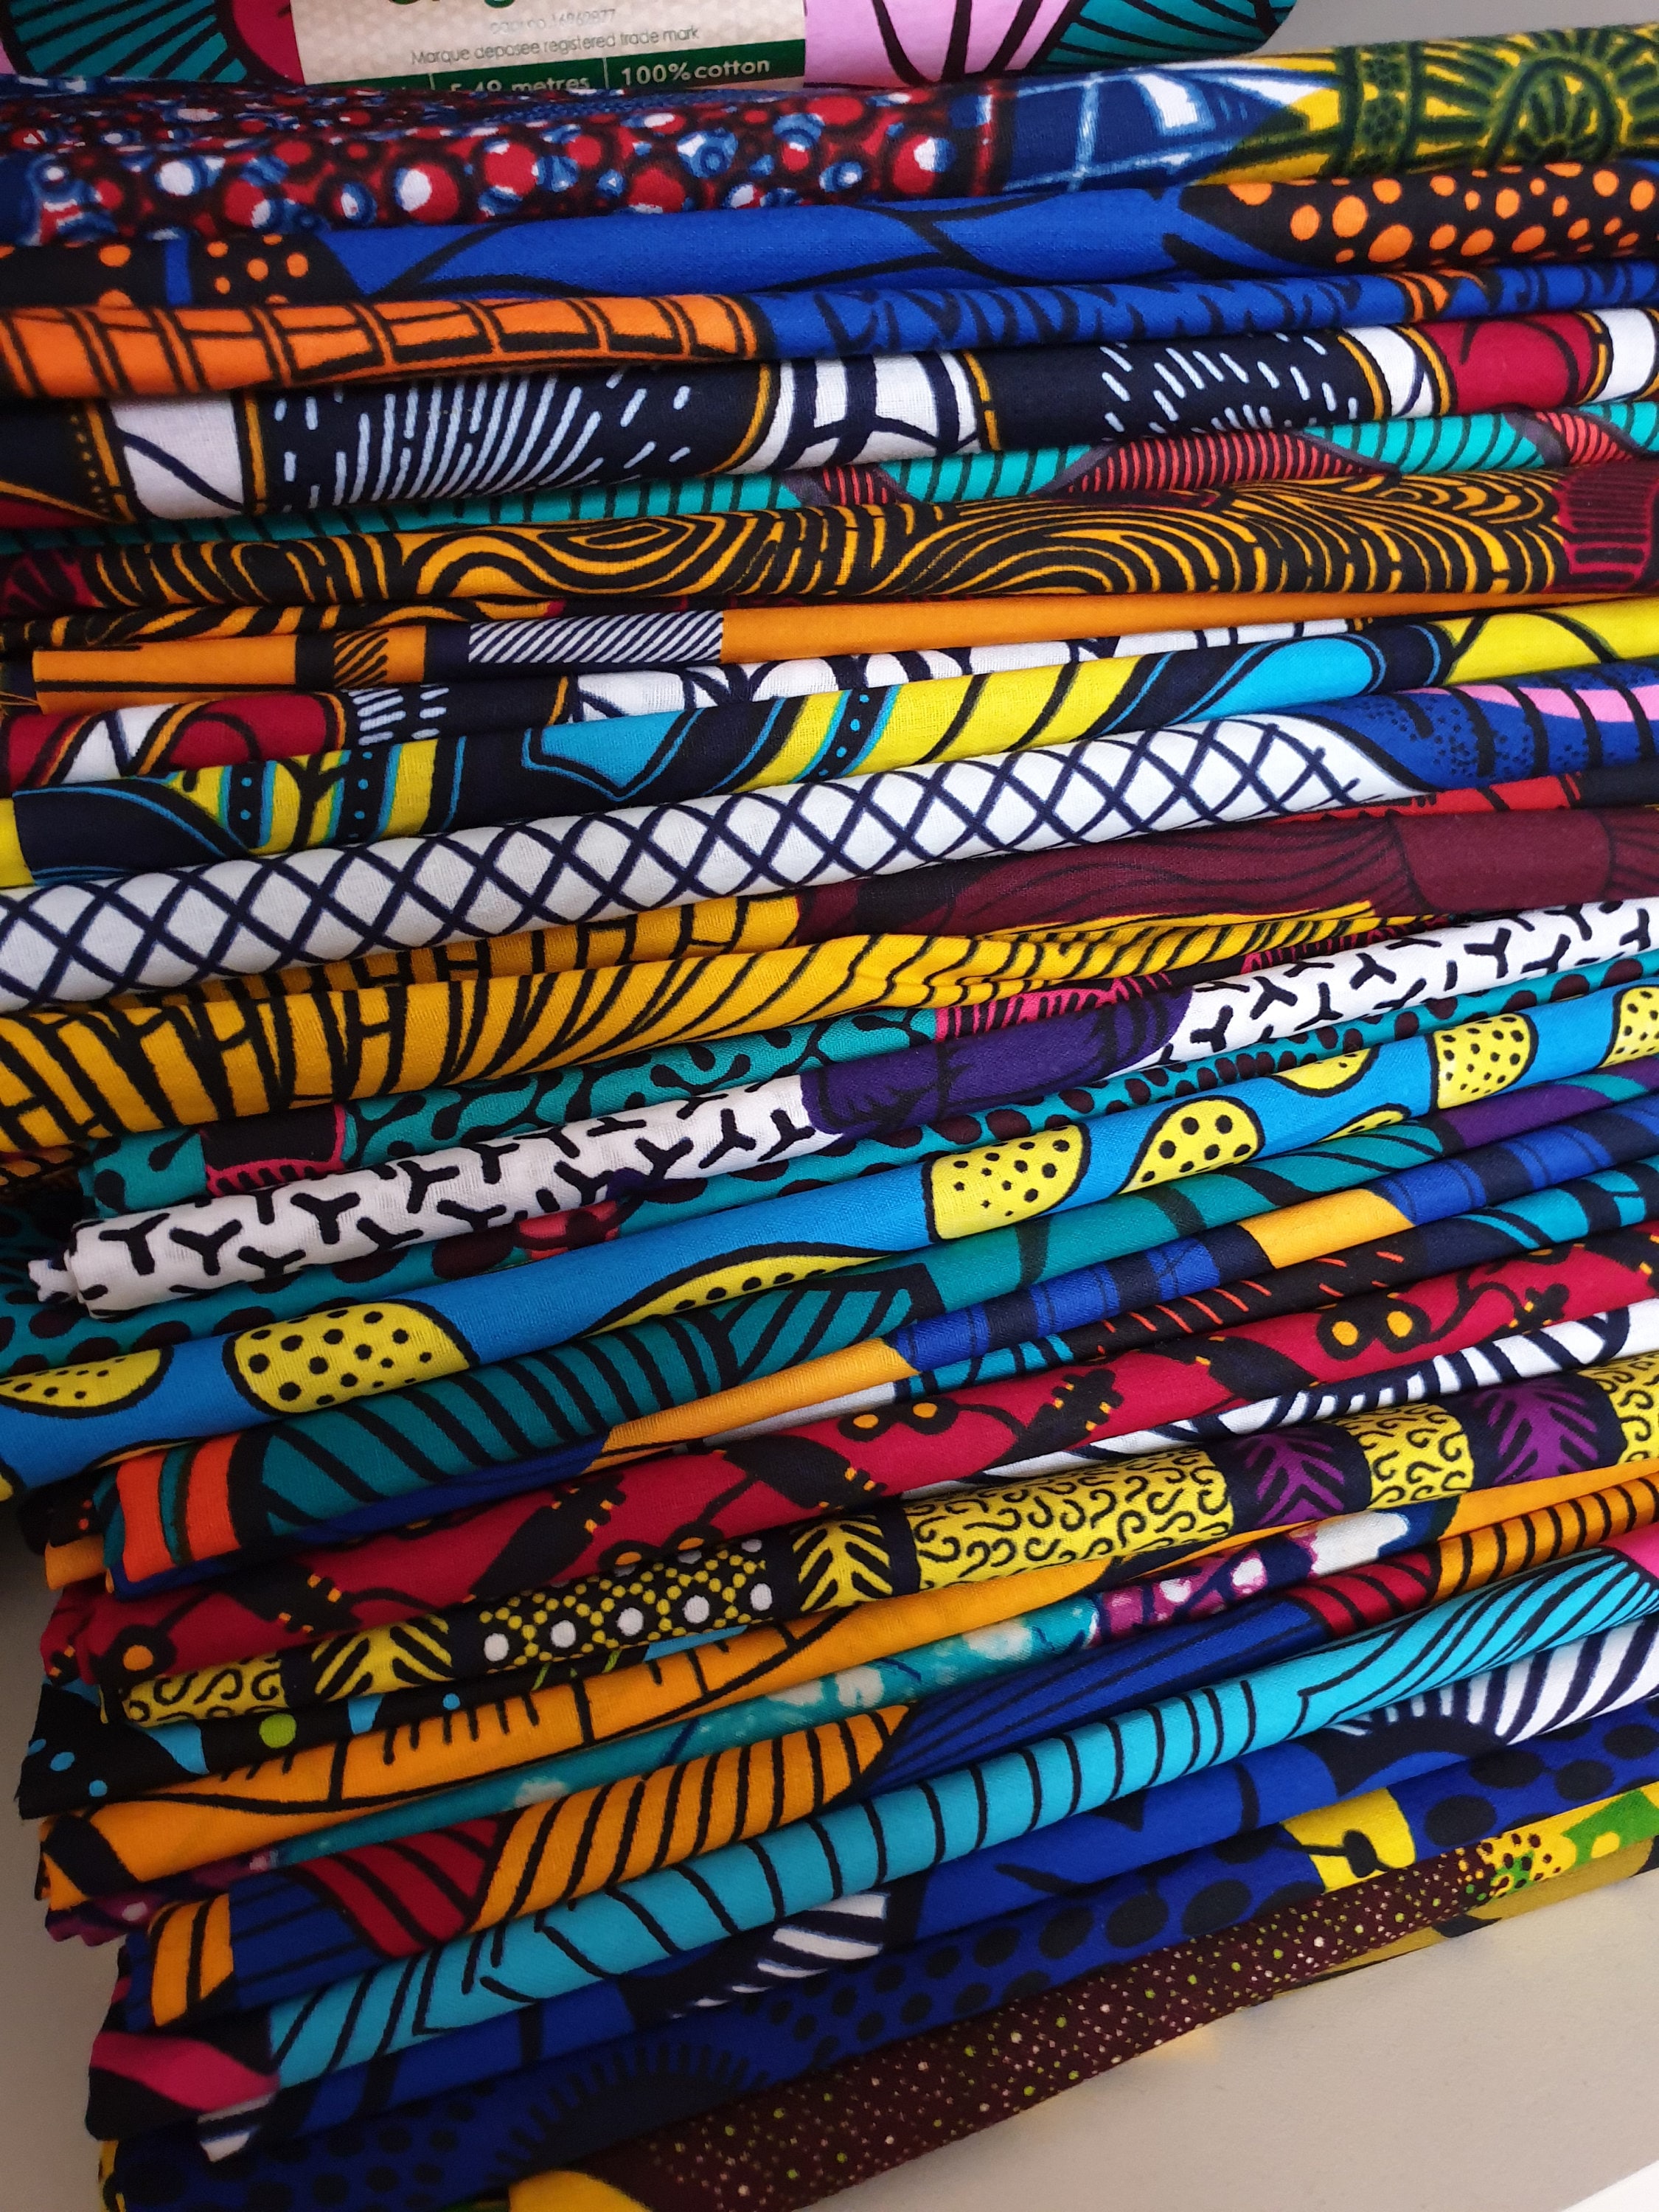 Wax Dyed Cotton Fat Quarters approx 18" x 21 201 African Kente Print  Fabric